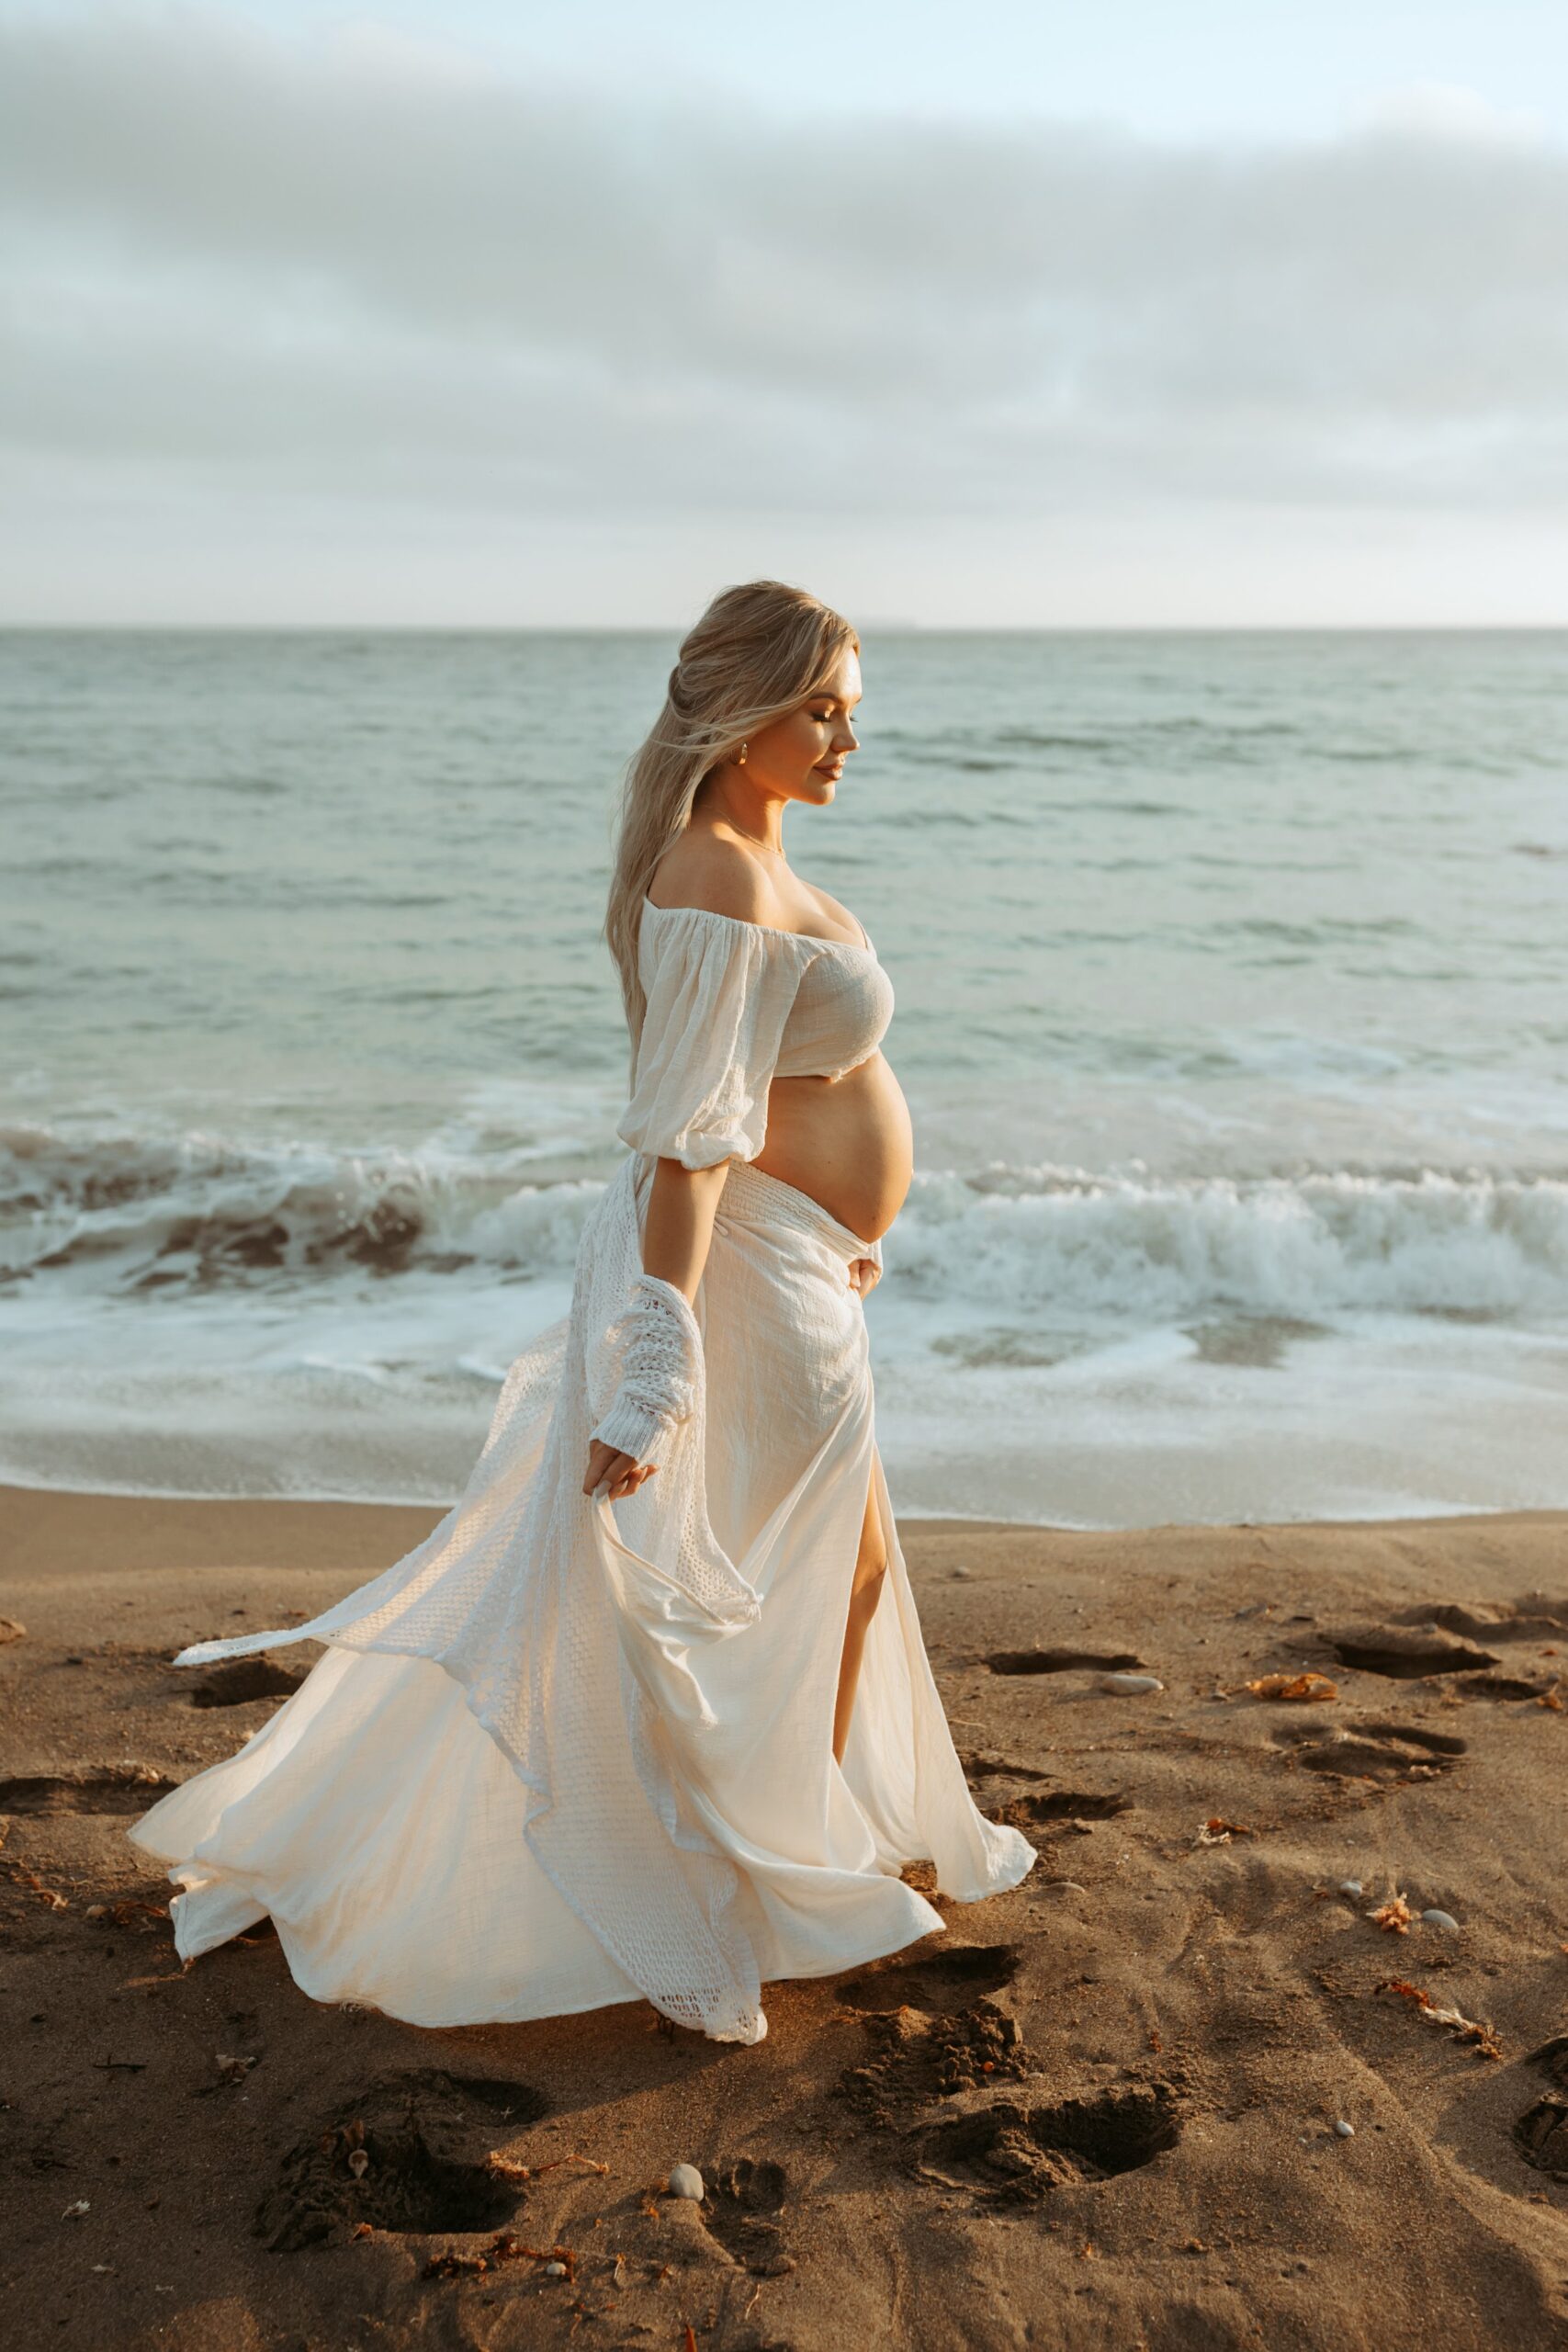 nuture-baby-photography-maternity-beach-session107.jpg